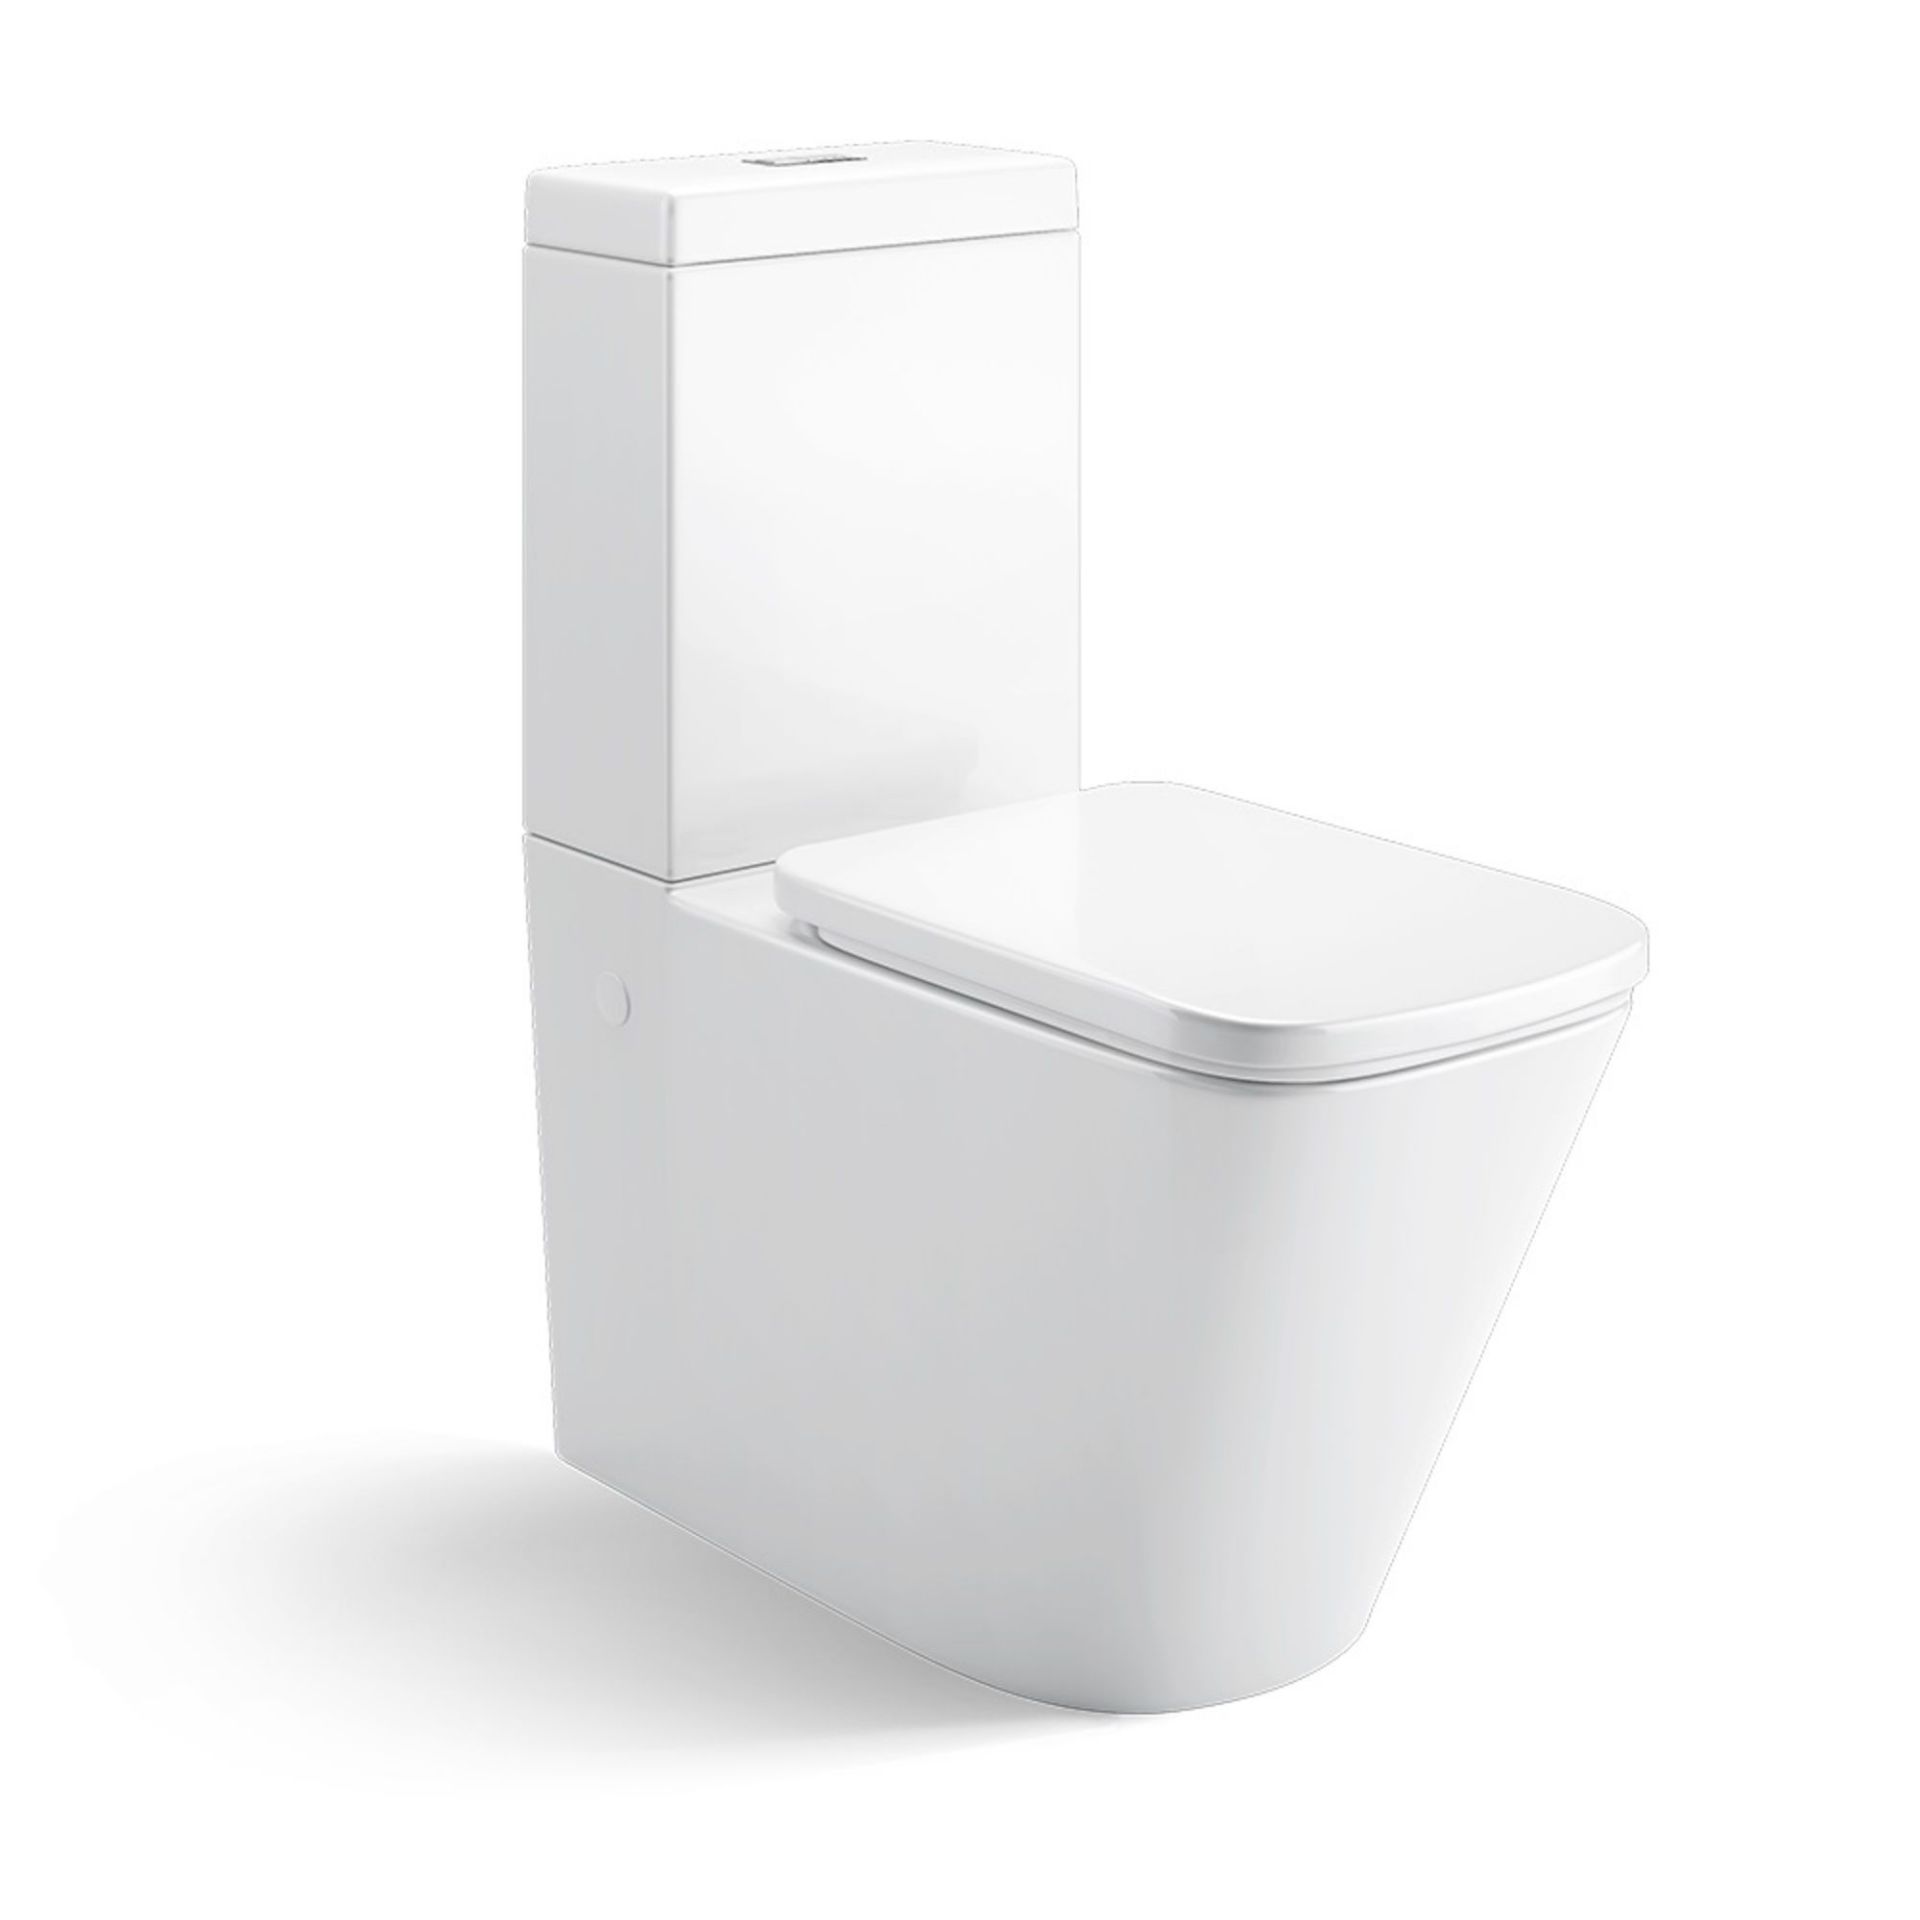 (XM83) Florence Close Coupled Toilet & Cistern inc Soft Close Seat Contemporary design finished in a